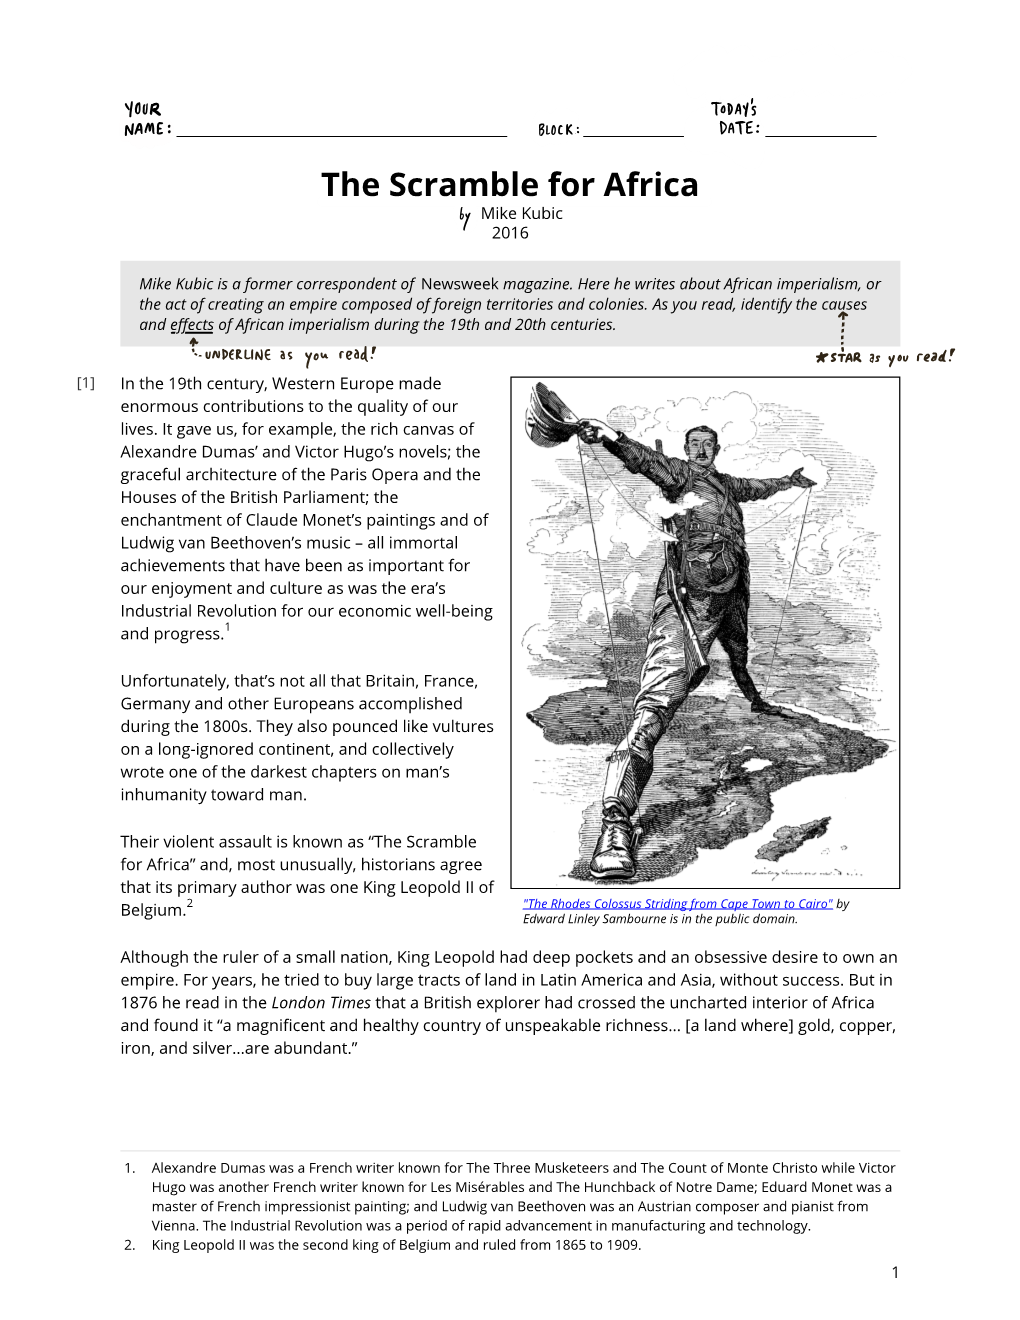 The Scramble for Africa Thitiff